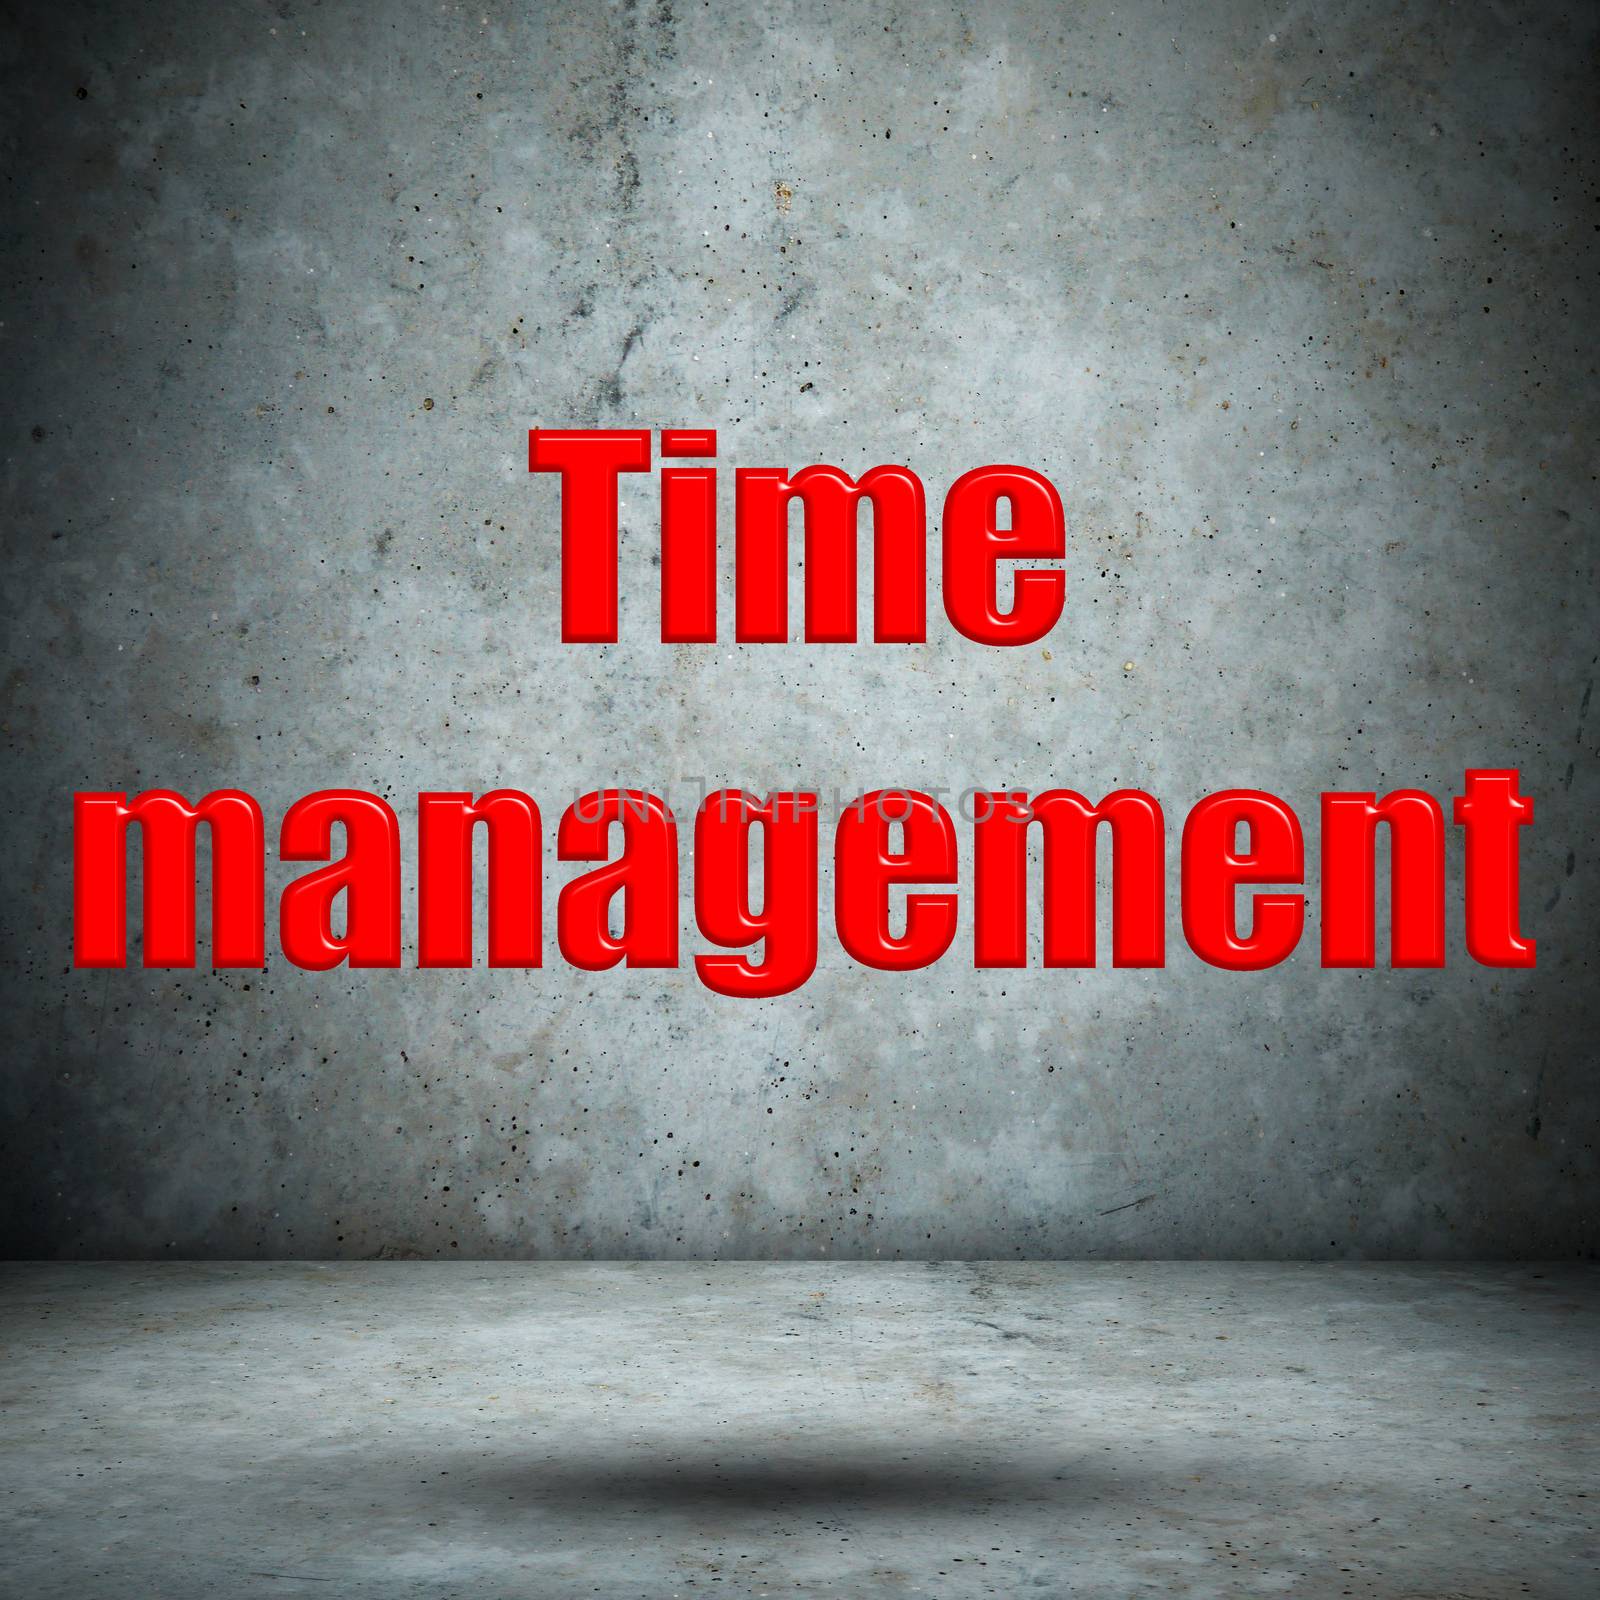 Time management concrete wall by tuk69tuk